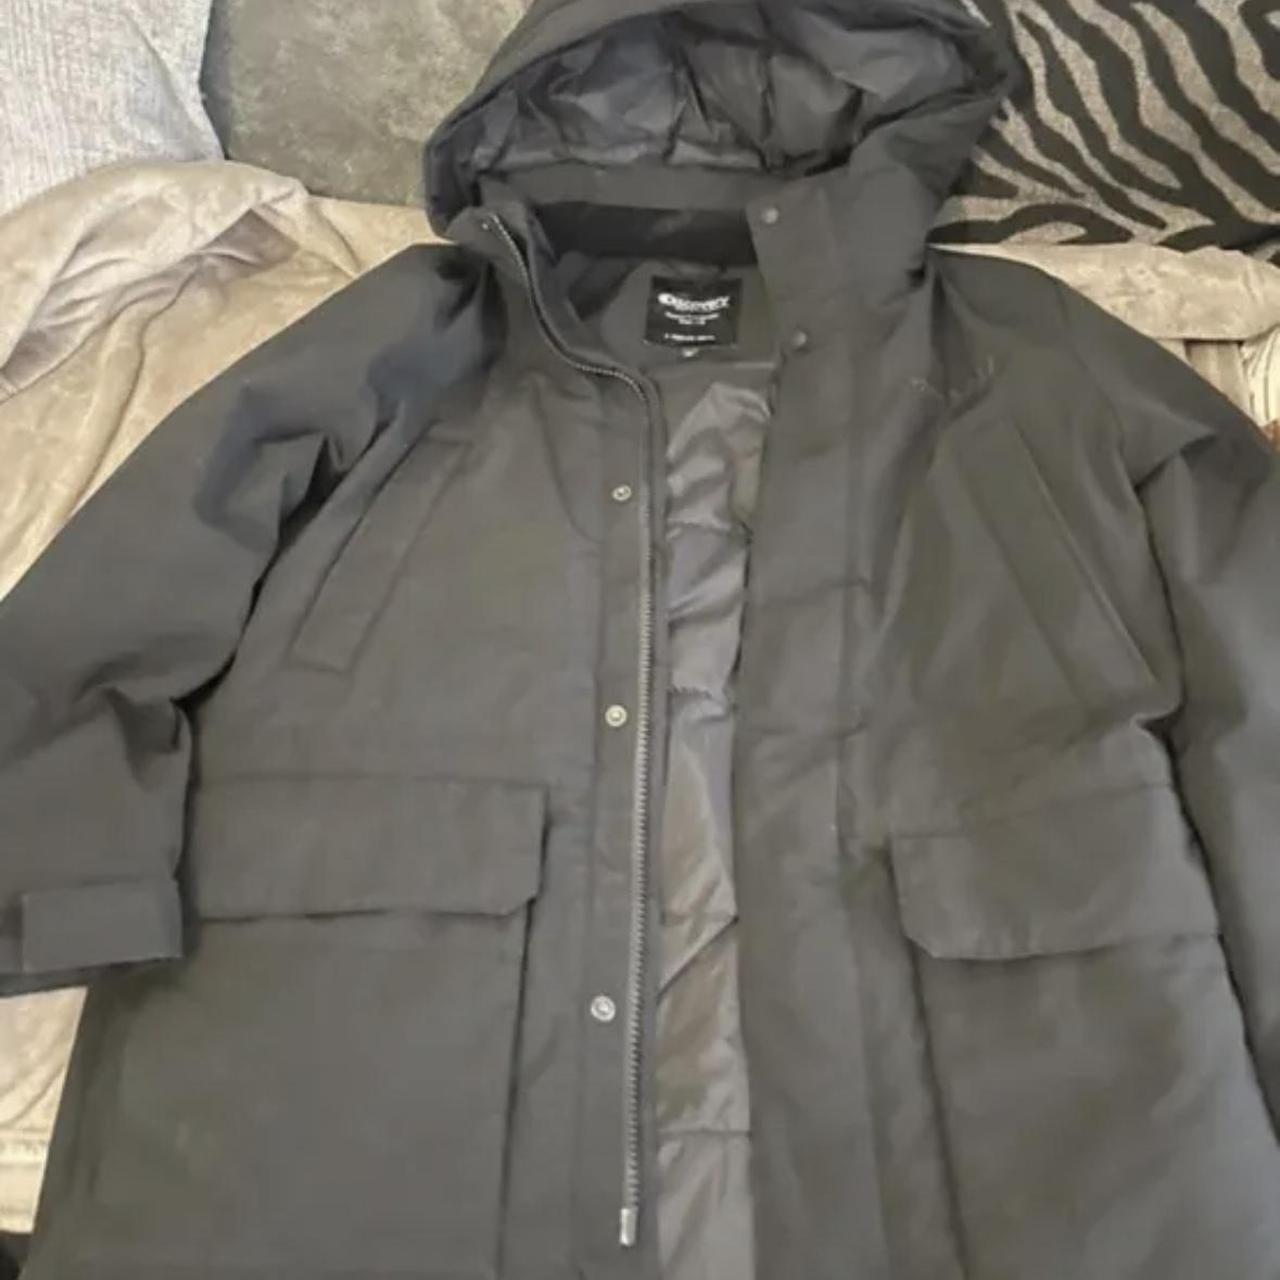 Discovery Expedition Coat / Jacket , used once on... - Depop